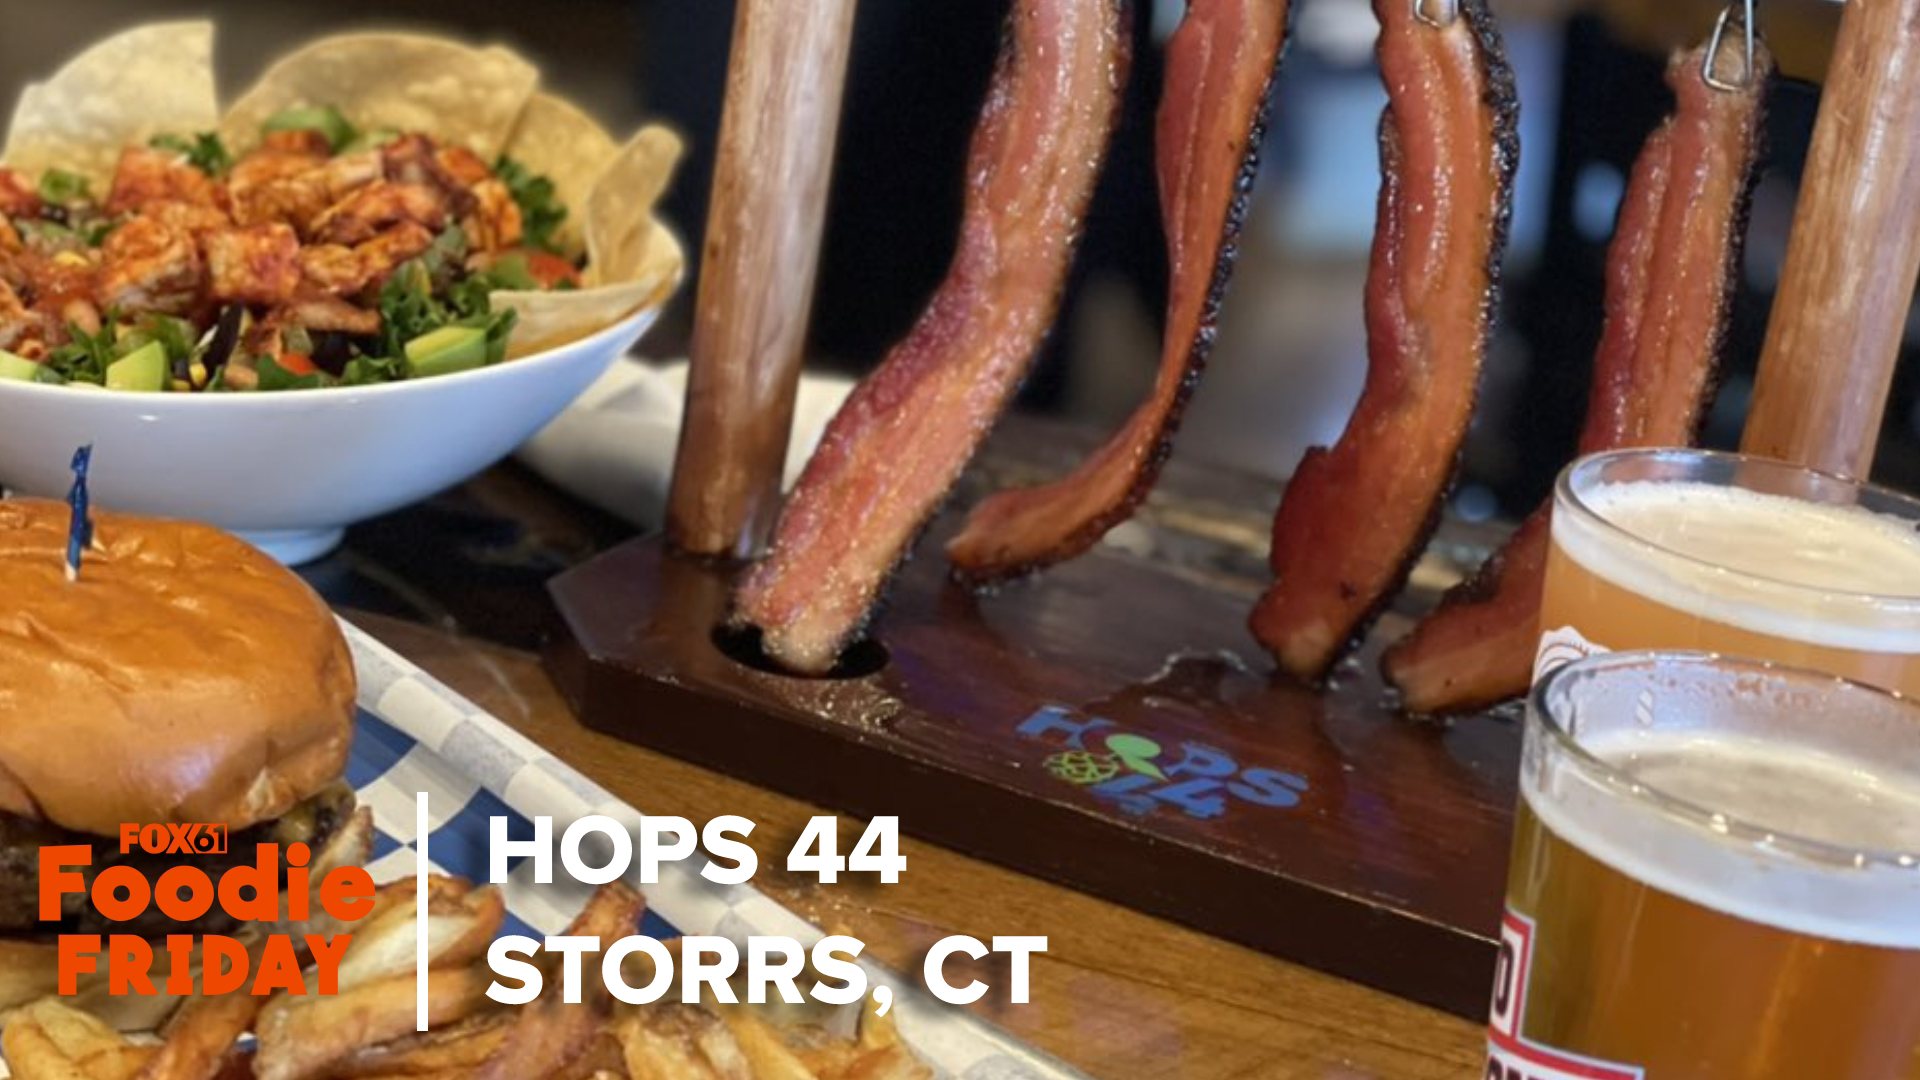 Foodie Friday's Sean Pragano checked out Hops 44 near UConn, which offers locally sourced bites and beer on tap!